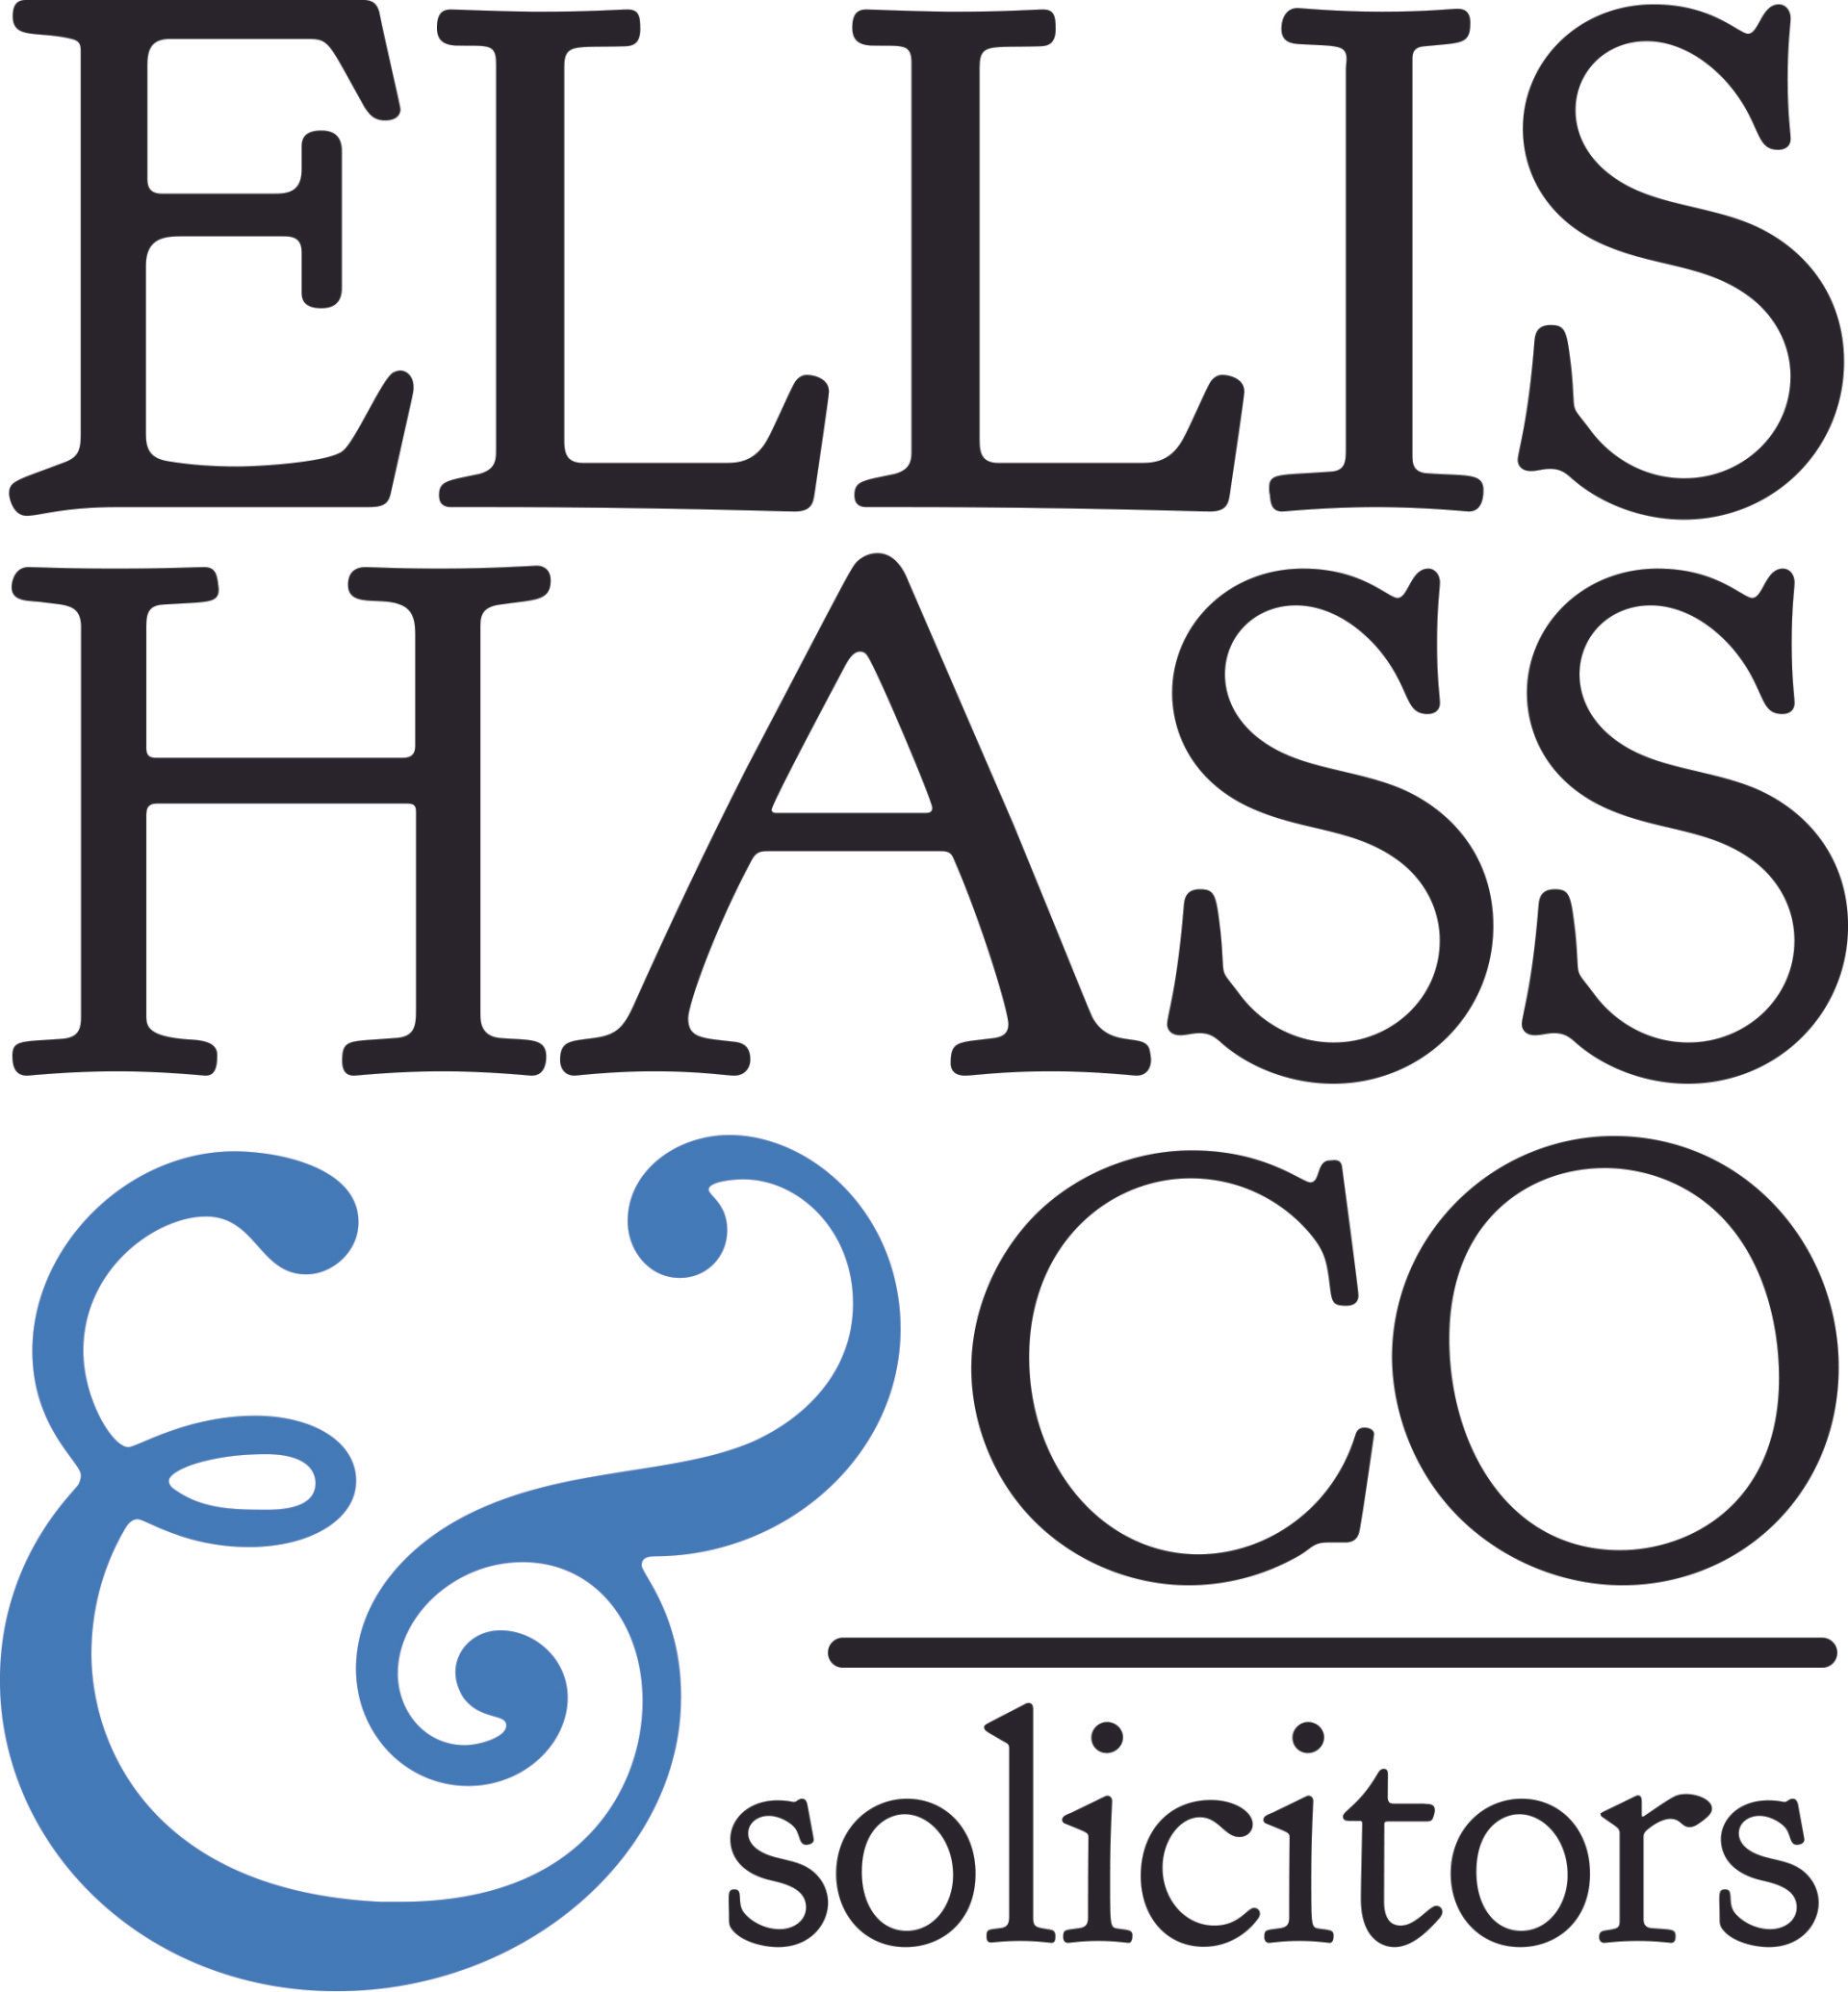 (c) Ehsolicitors.co.uk